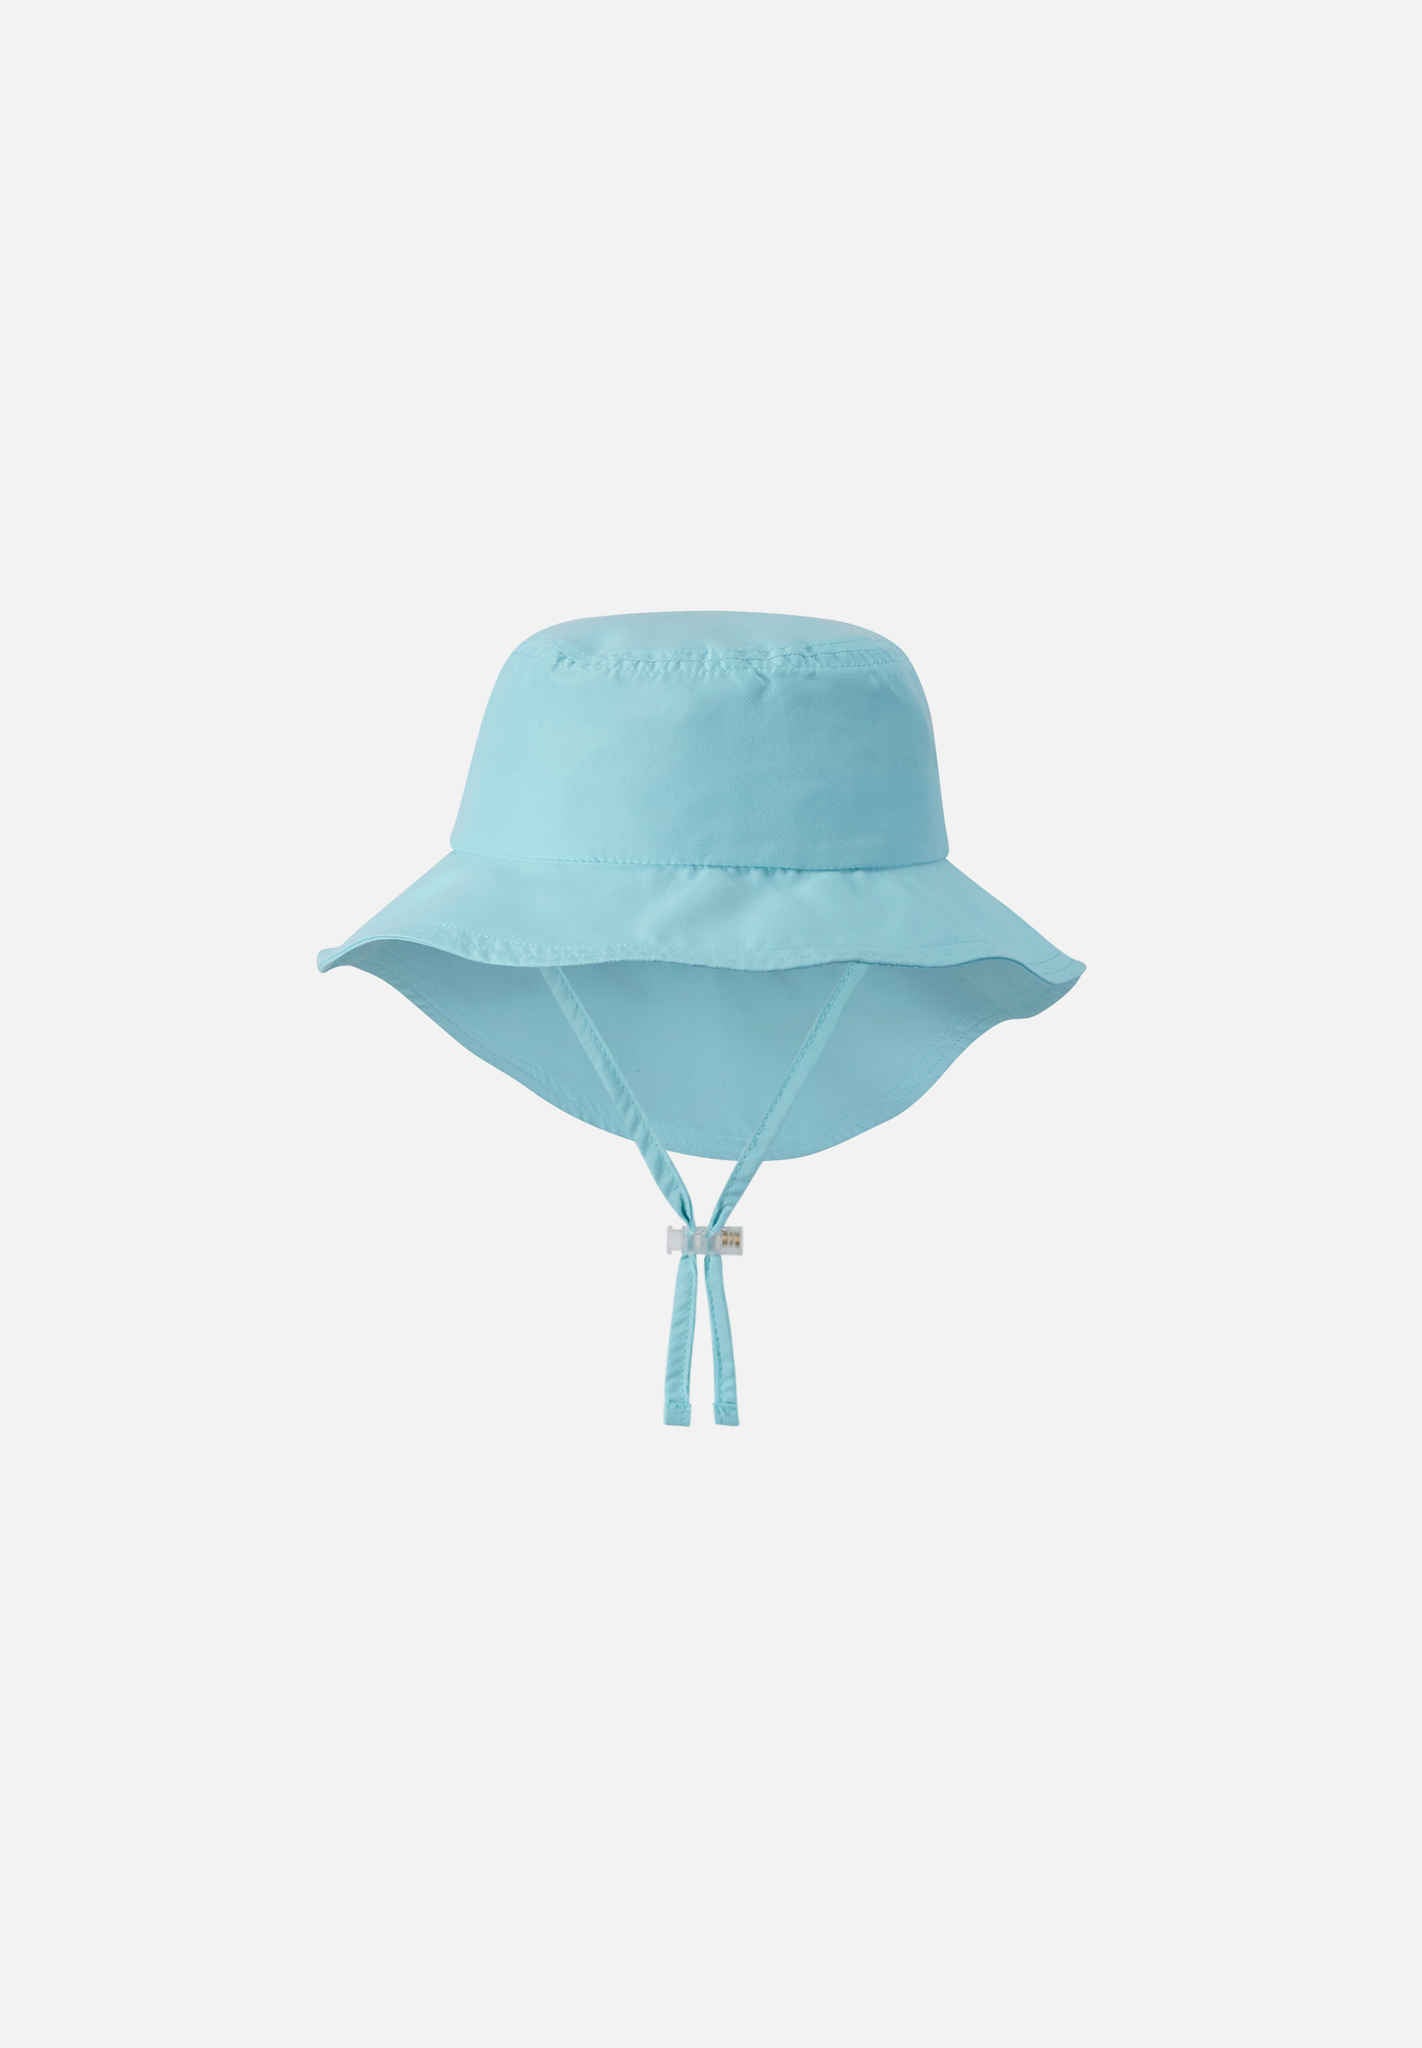 Children's Sun Hats - Stylish Protection from the Sun